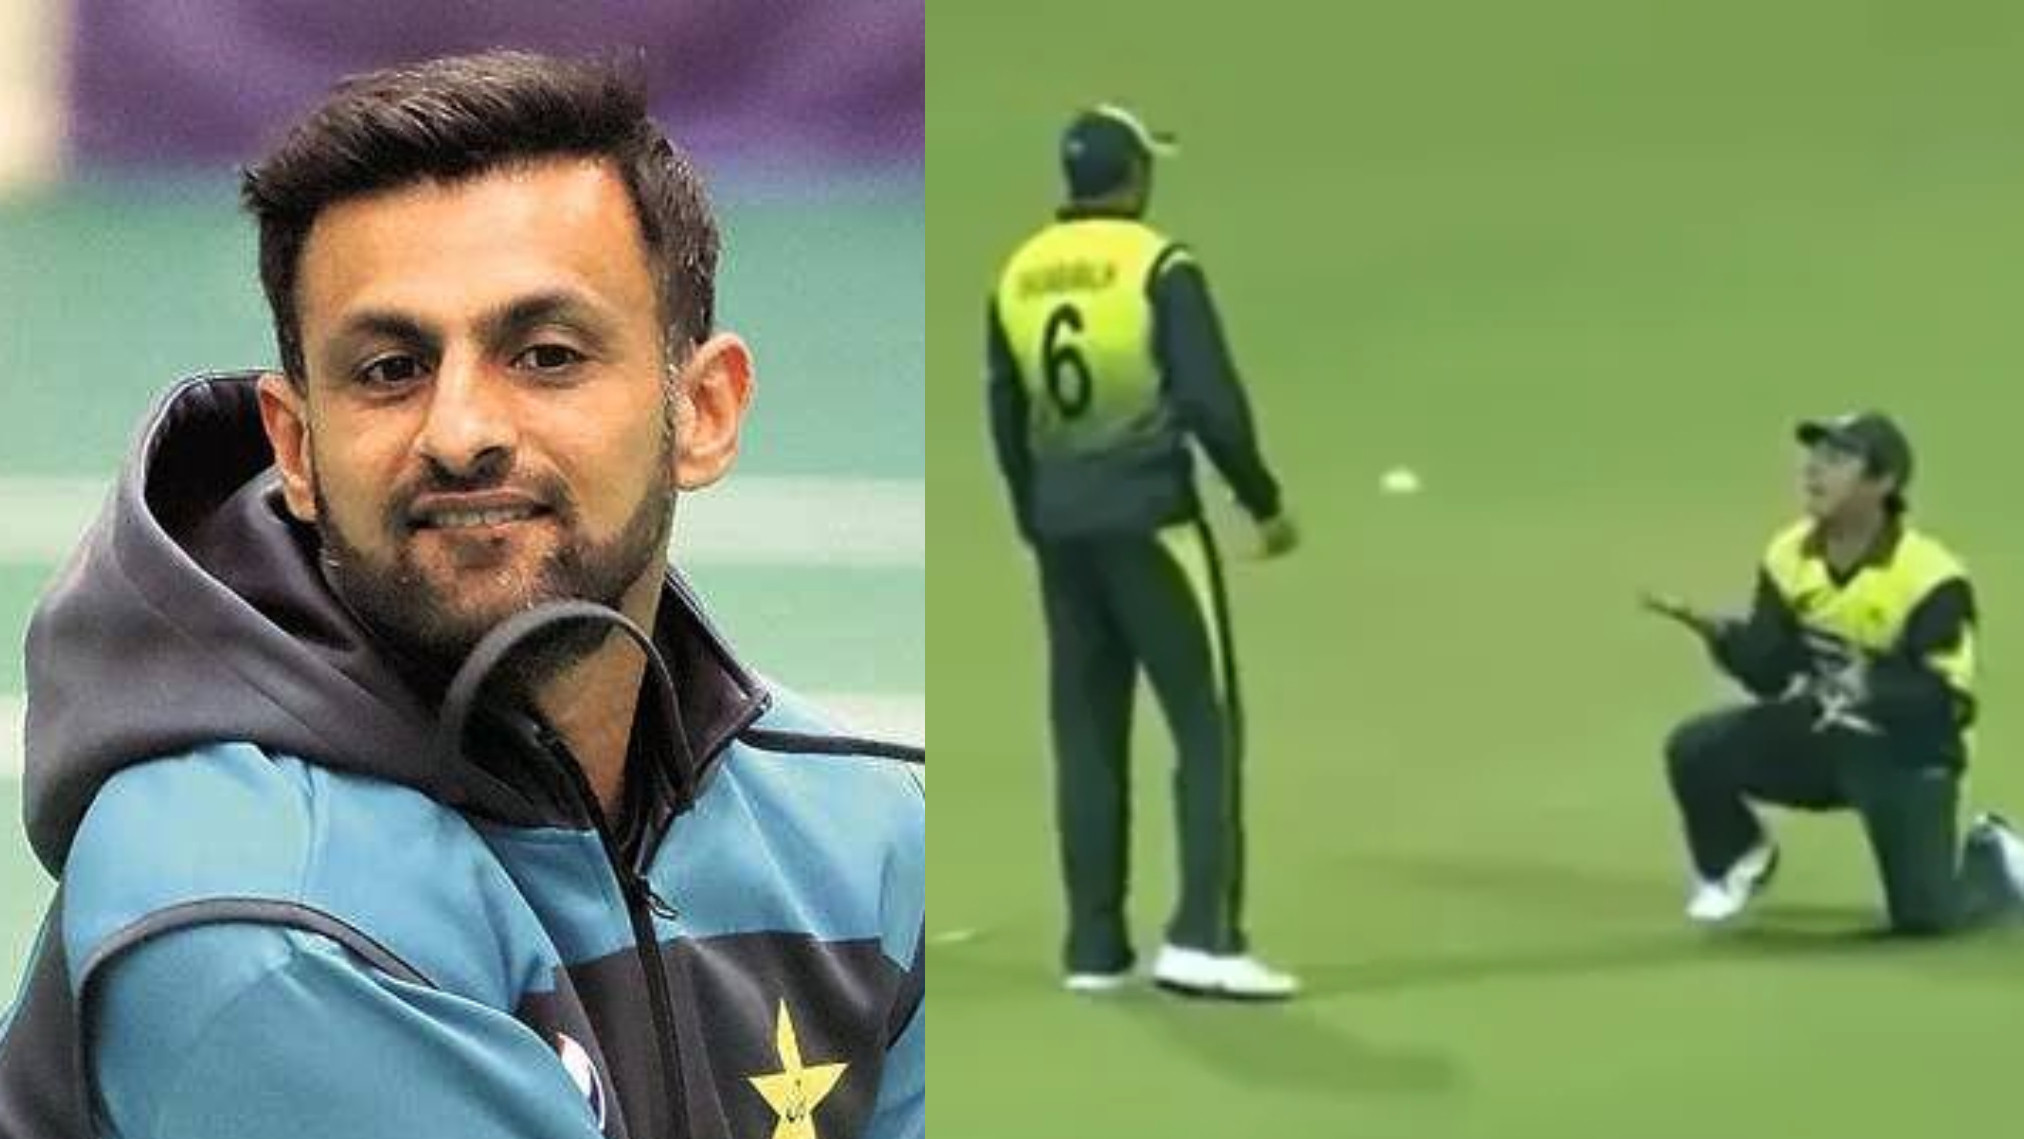 WATCH- 'I had let it go already'- Shoaib Malik reveals conversation with Saeed Ajmal after infamous drop catch of Gayle